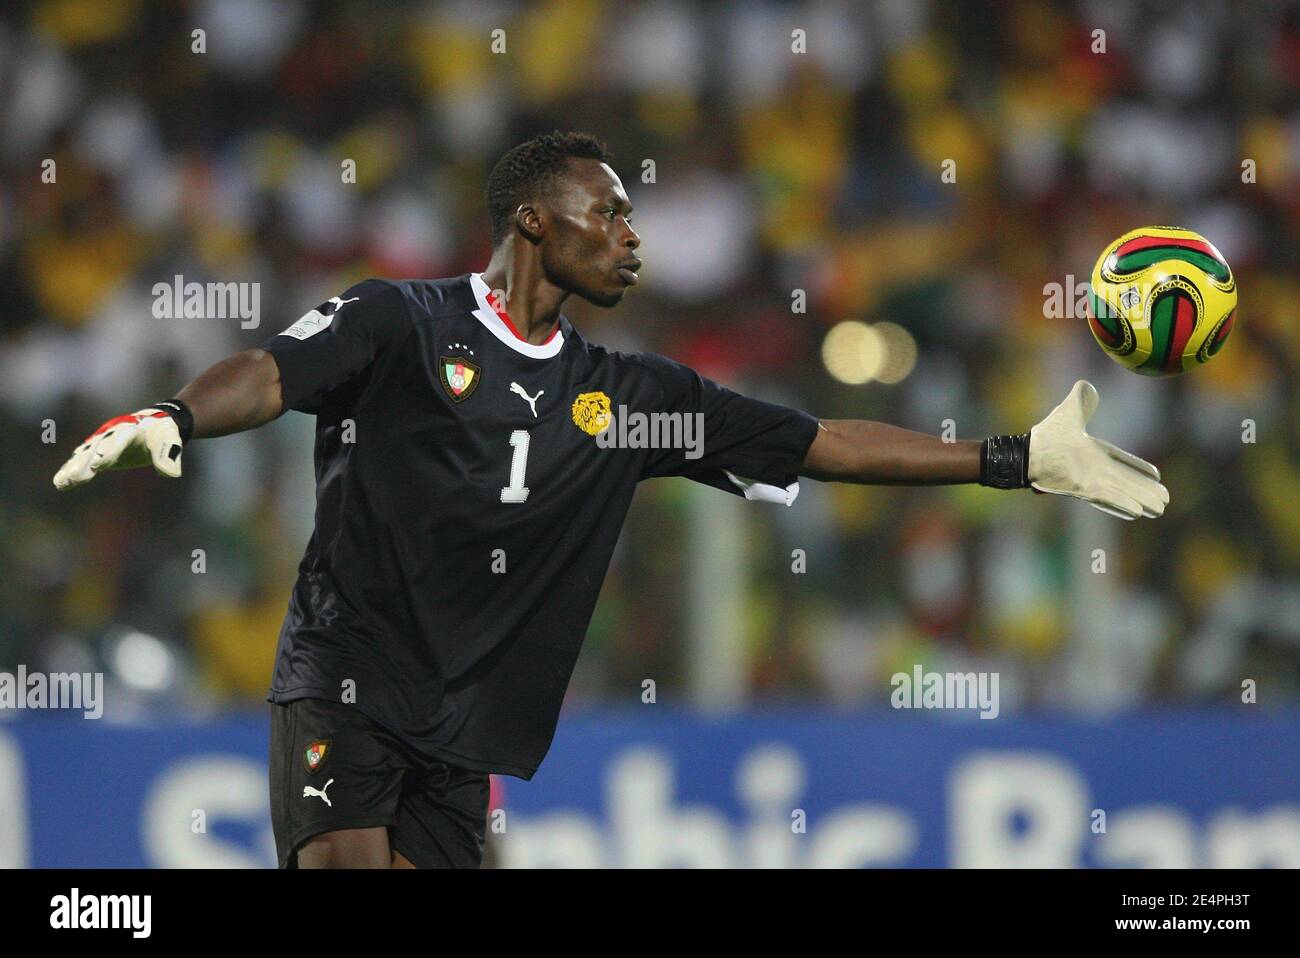 Cameroon's goalkeeper Carlos Kameni Idris during the African Cup of Nations Semi Final soccer match, Ghana vs Cameroon in Accra, Ghana on February 7, 2008. Cameroon are only one step away from a record-equalling fifth African Nations Cup title after wrecking Ghana's party with a 1-0 semi-final win over the hosts. Photo by Steeve McMay/Cameleon/ABACAPRESS.COM Stock Photo